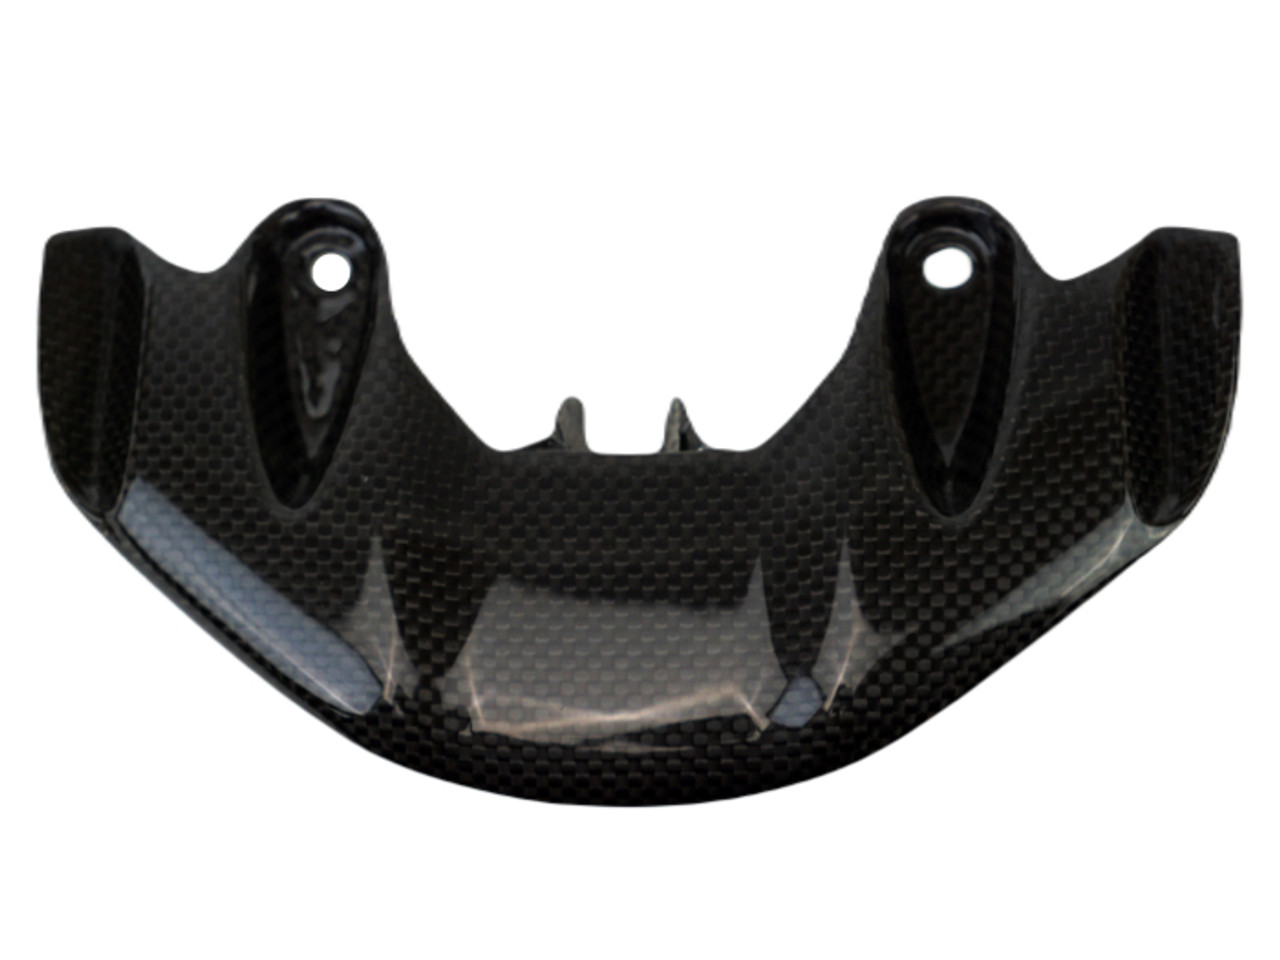 Intake in Glossy Plain Weave Carbon Fiber for Triumph Speed Triple 1200